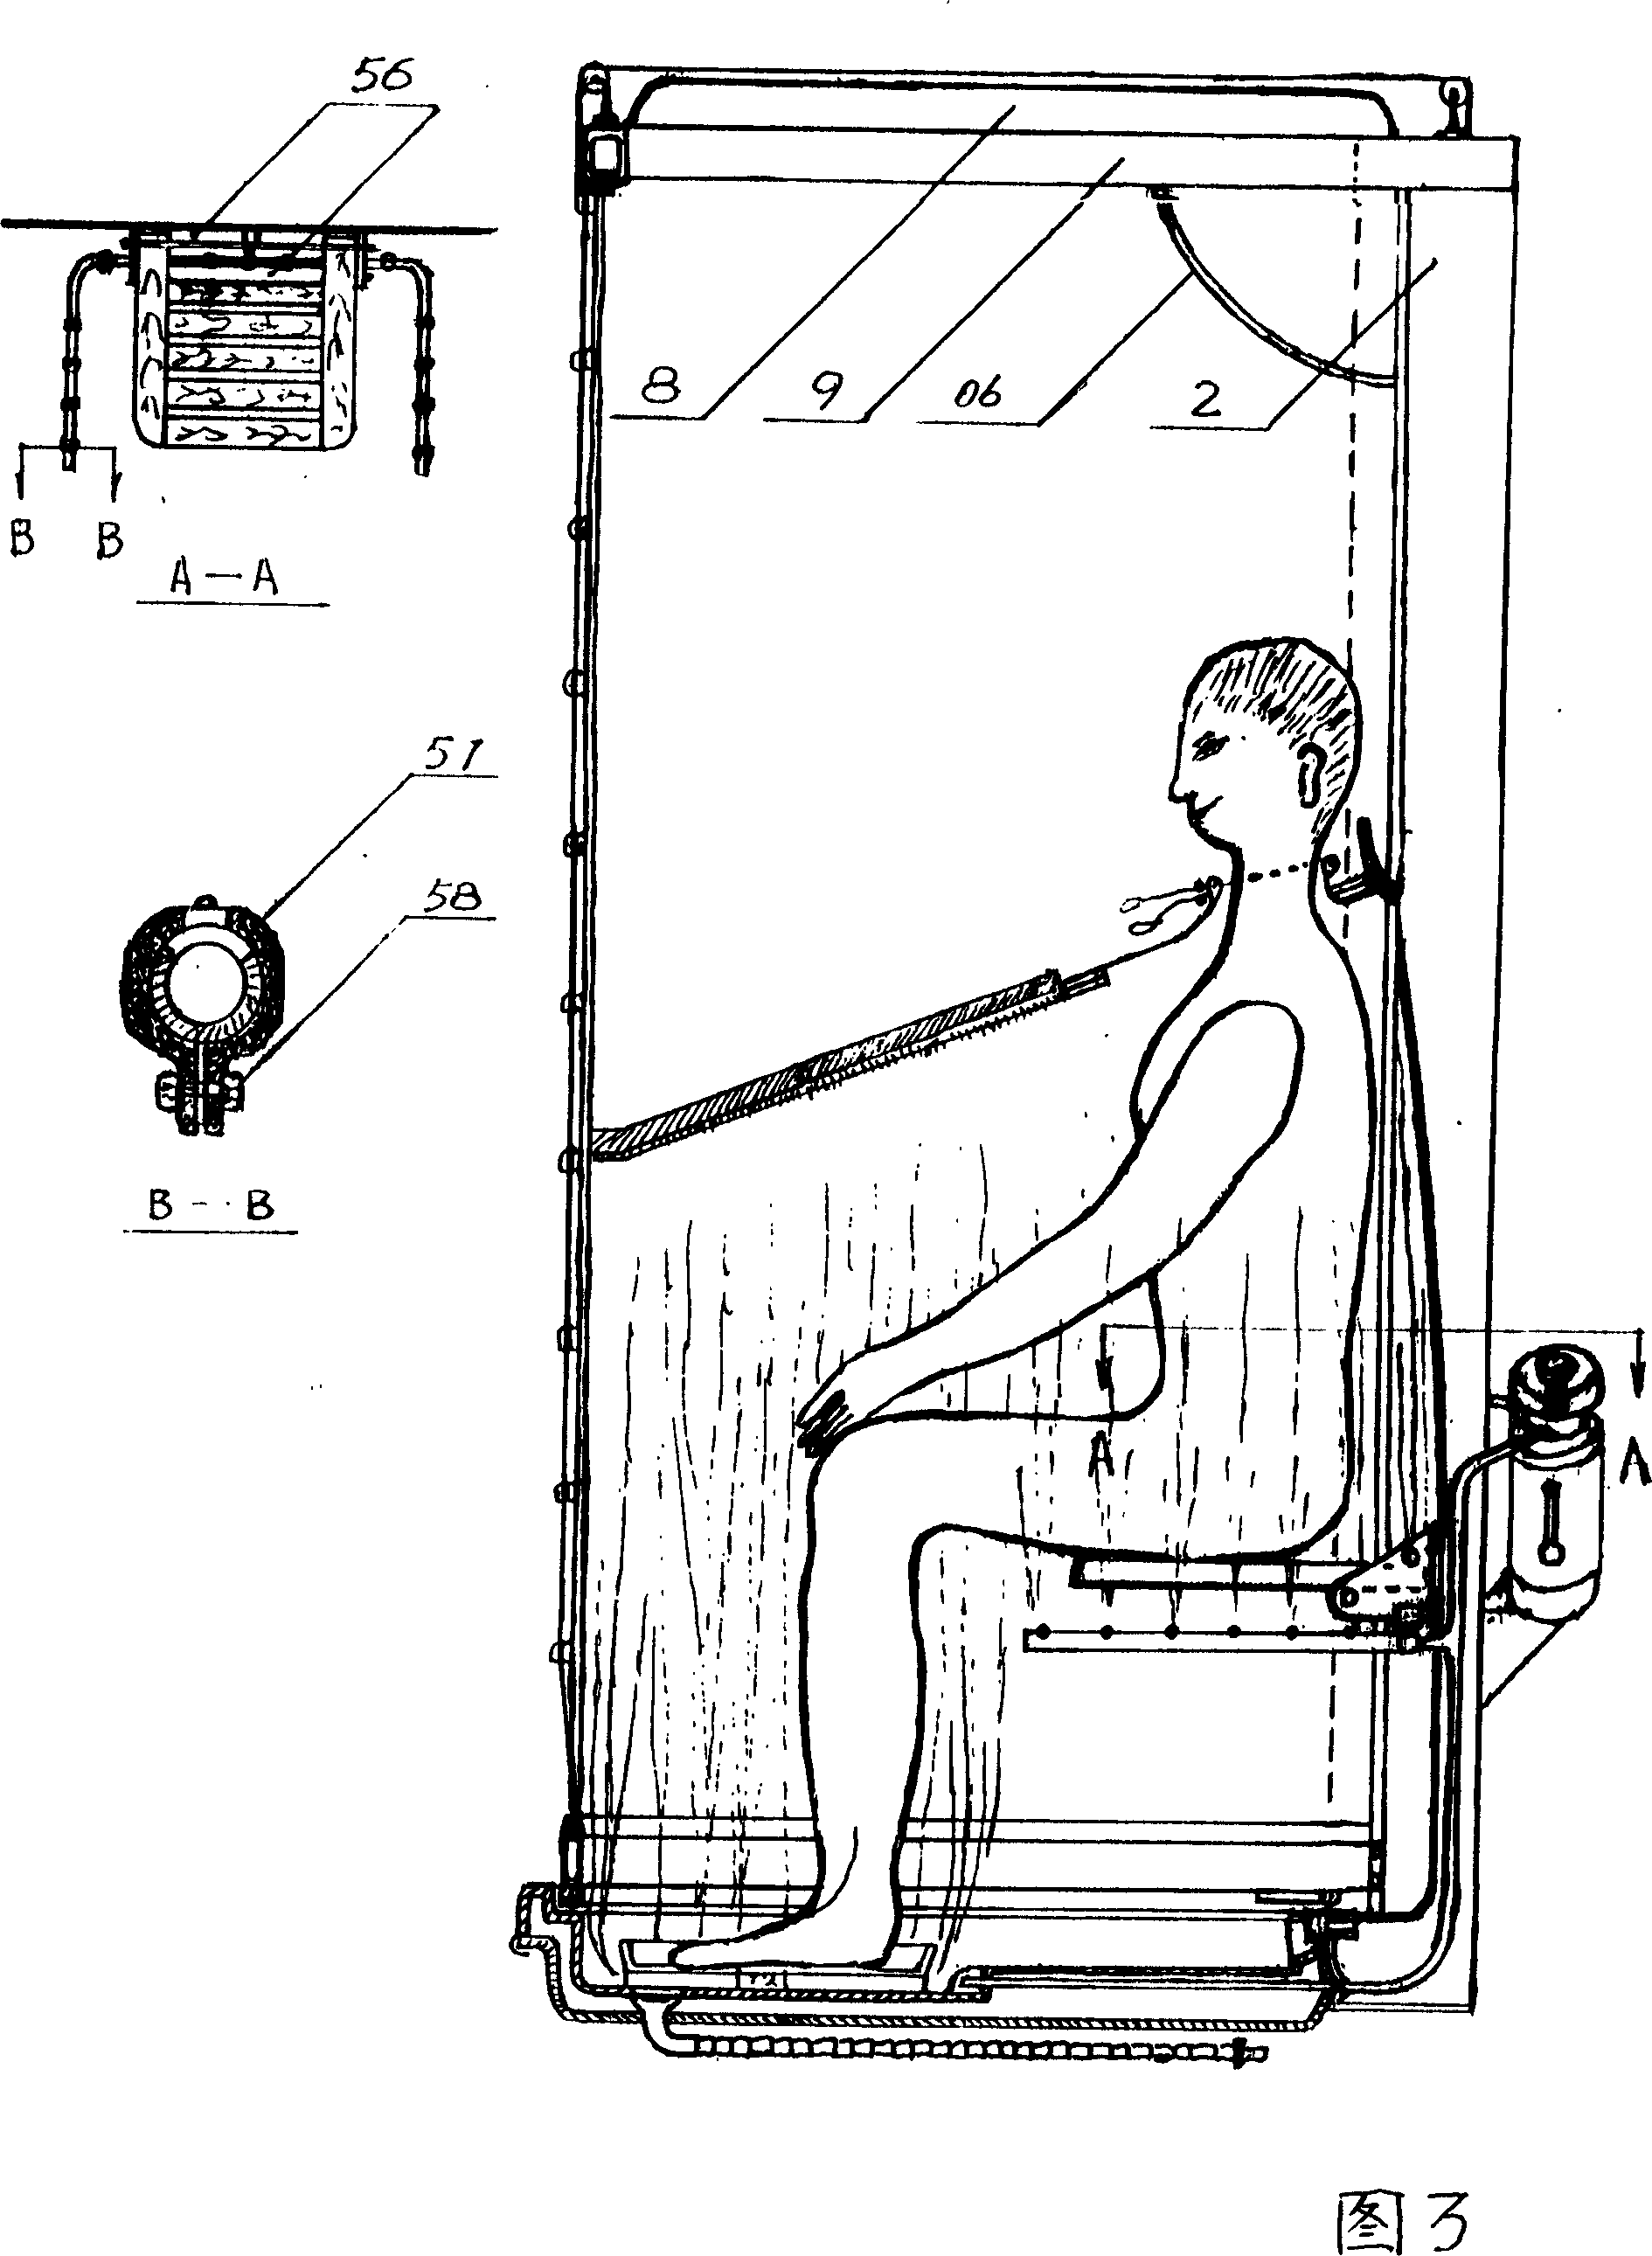 Hanging-panel bell-type steaming-shower device